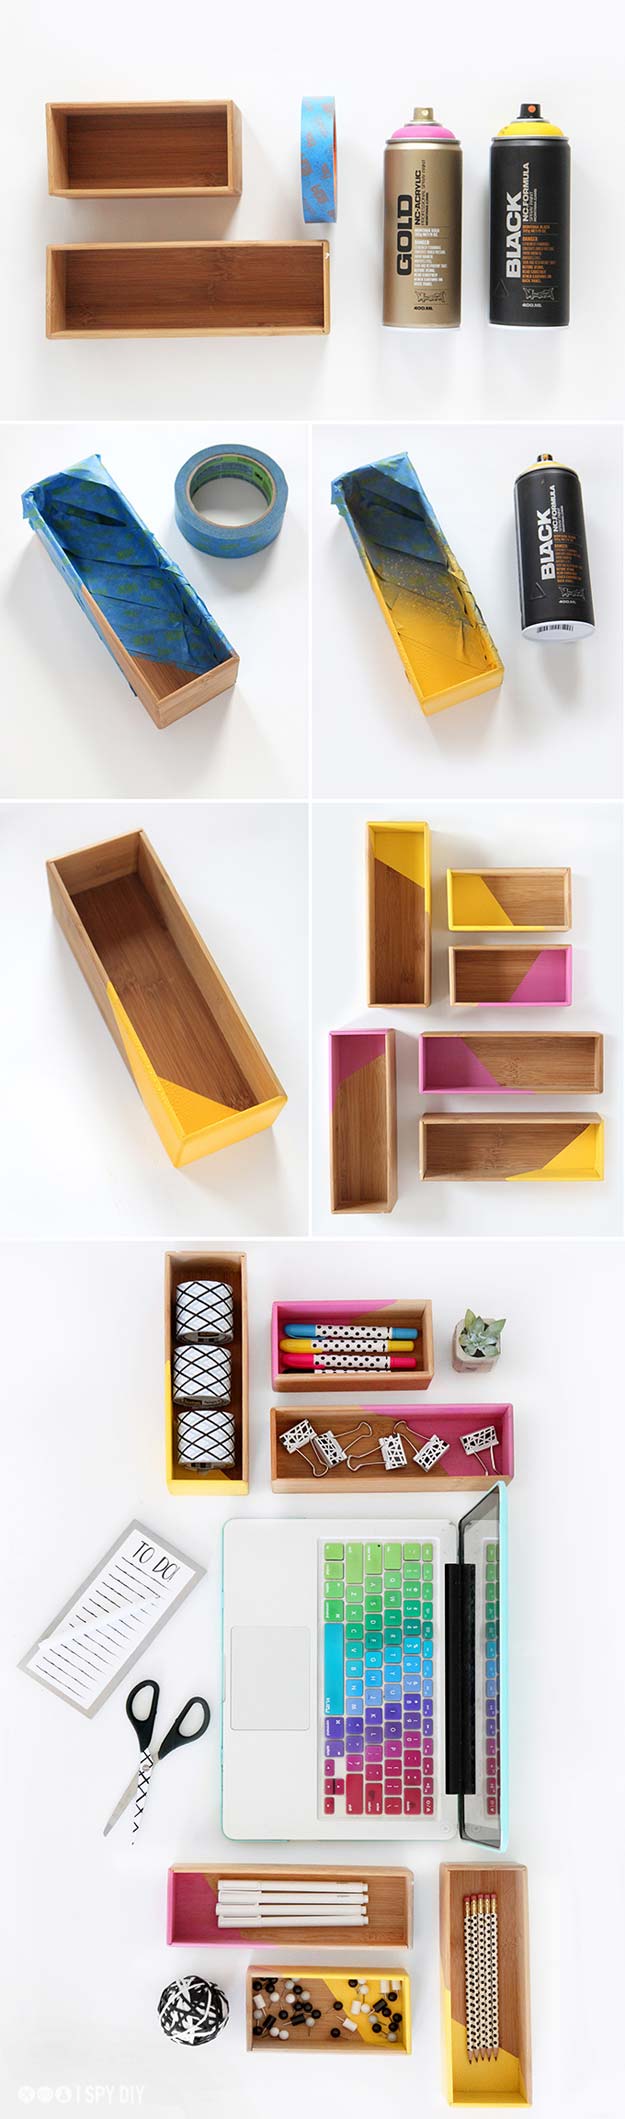 Best DIY Ideas from Tumblr - DIY Color Block Box Supplies Storage - Crafts and DIY Projects Inspired by Tumblr are Perfect Room Decor for Teens and Adults - Fun Crafts and Easy DIY Gifts, Clothes and Bedroom Project Tutorials for Teenagers and Tweens 